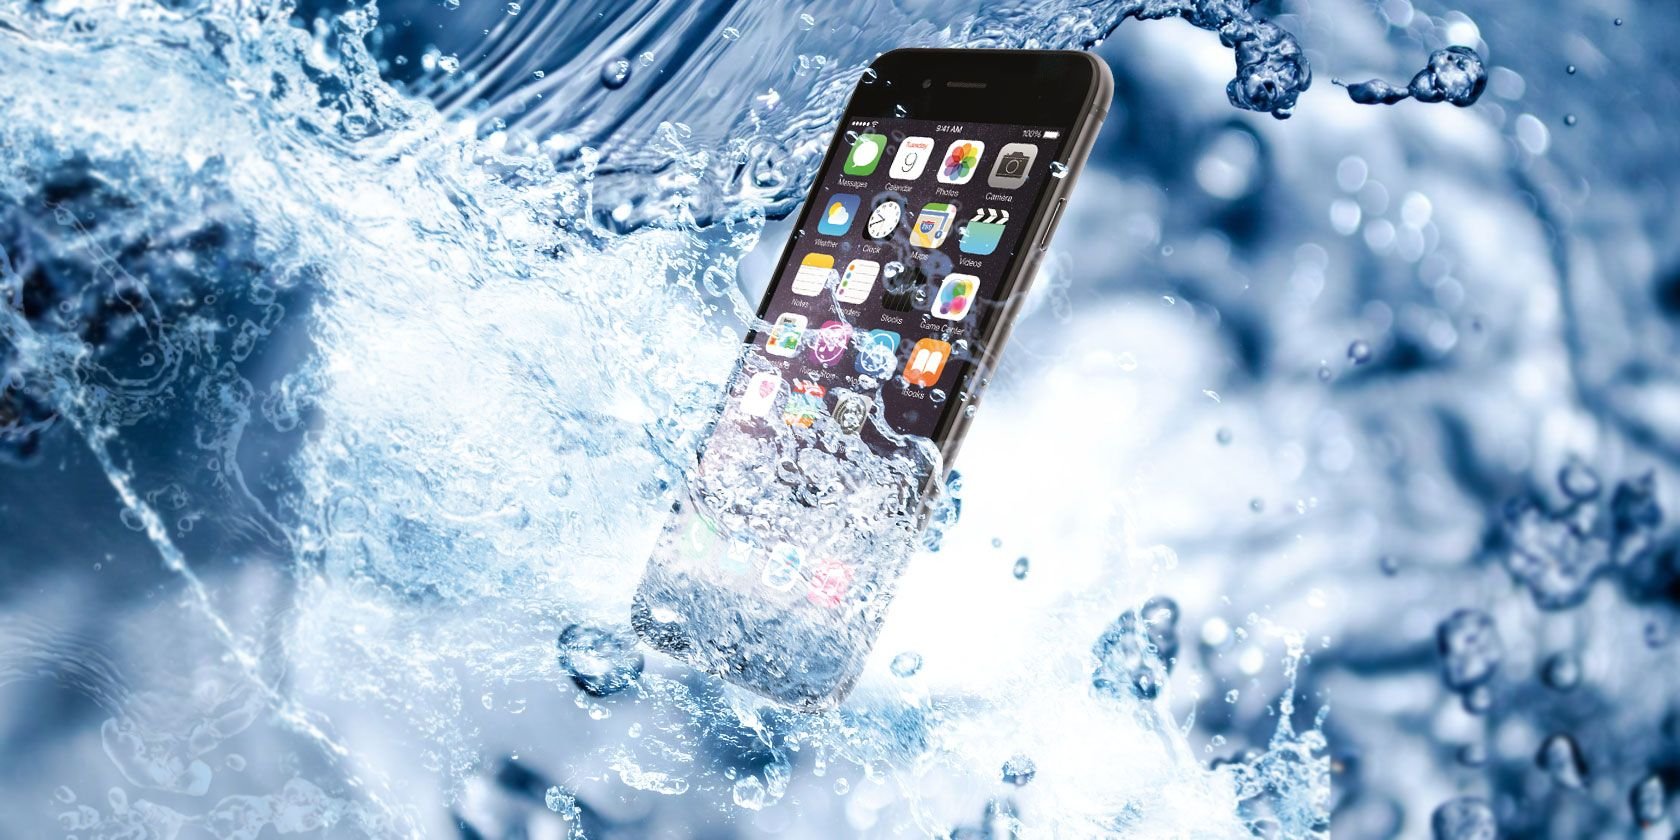 How to Fix a Water-Damaged iPhone